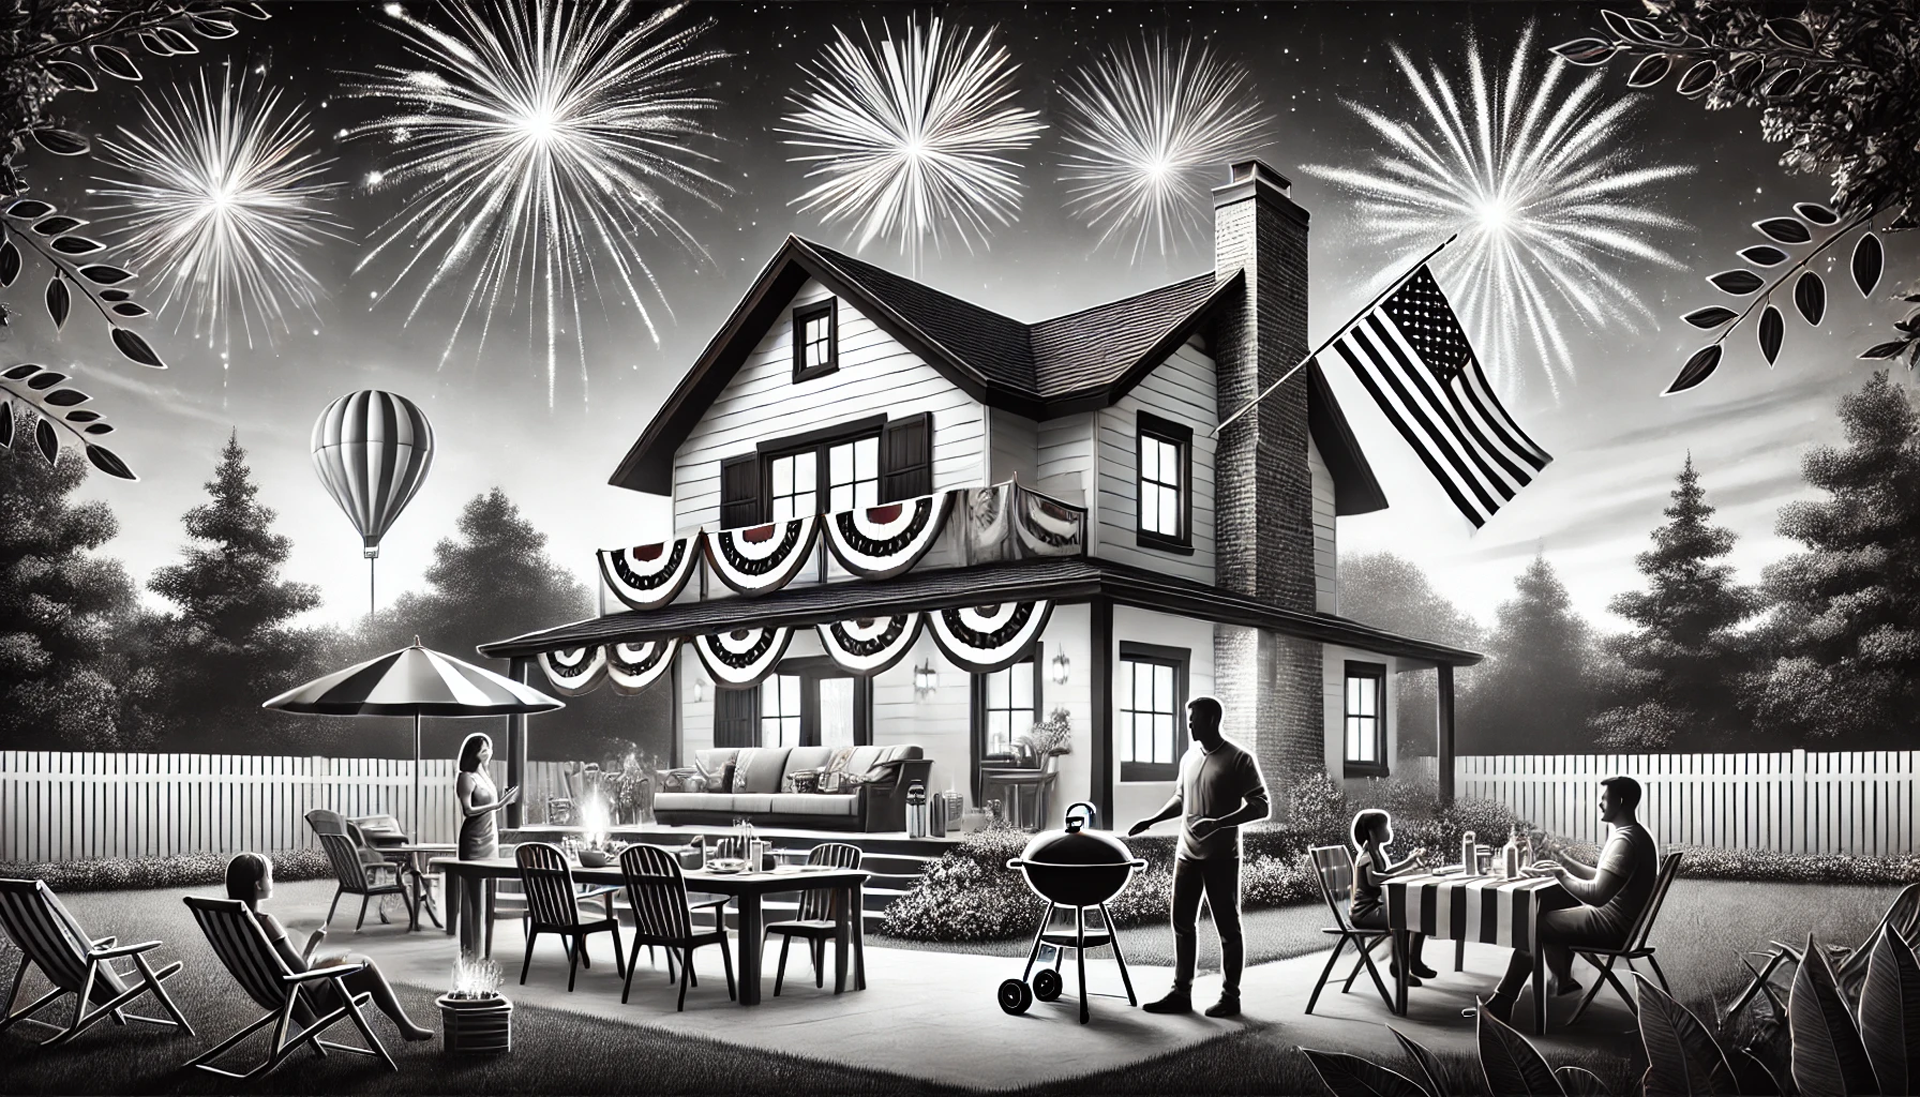 Featured image for “Celebrate the Fourth of July in Style”